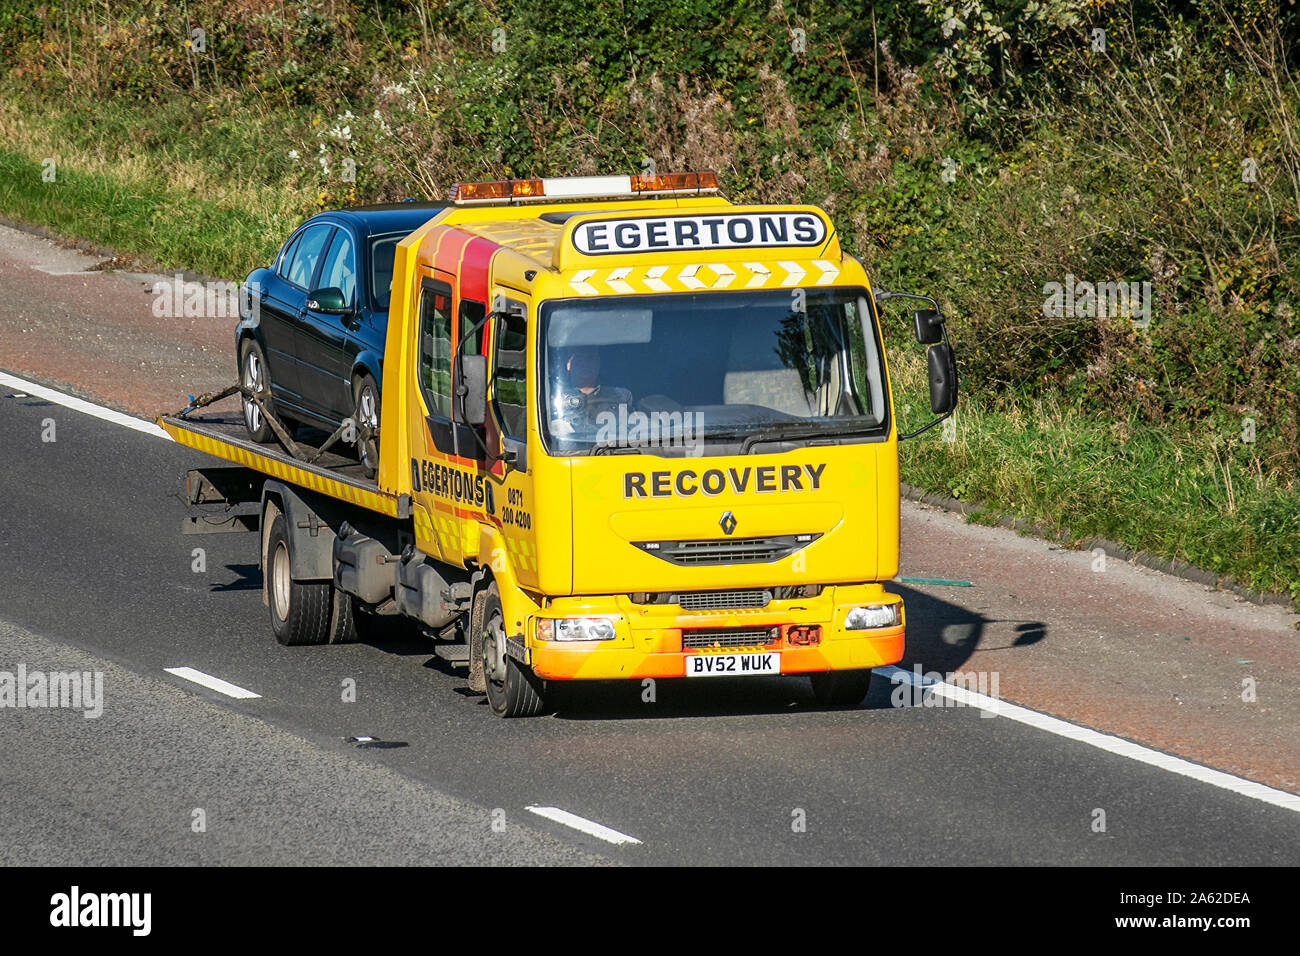 2002 Renault Midlum; Egertons Breakdon Recovery;  Haulage delivery trucks, lorry, transportation, truck, 24hr emergency rescue vehicle, delivery, commercial transport industry on the M6 at Lancaster, UK Stock Photo